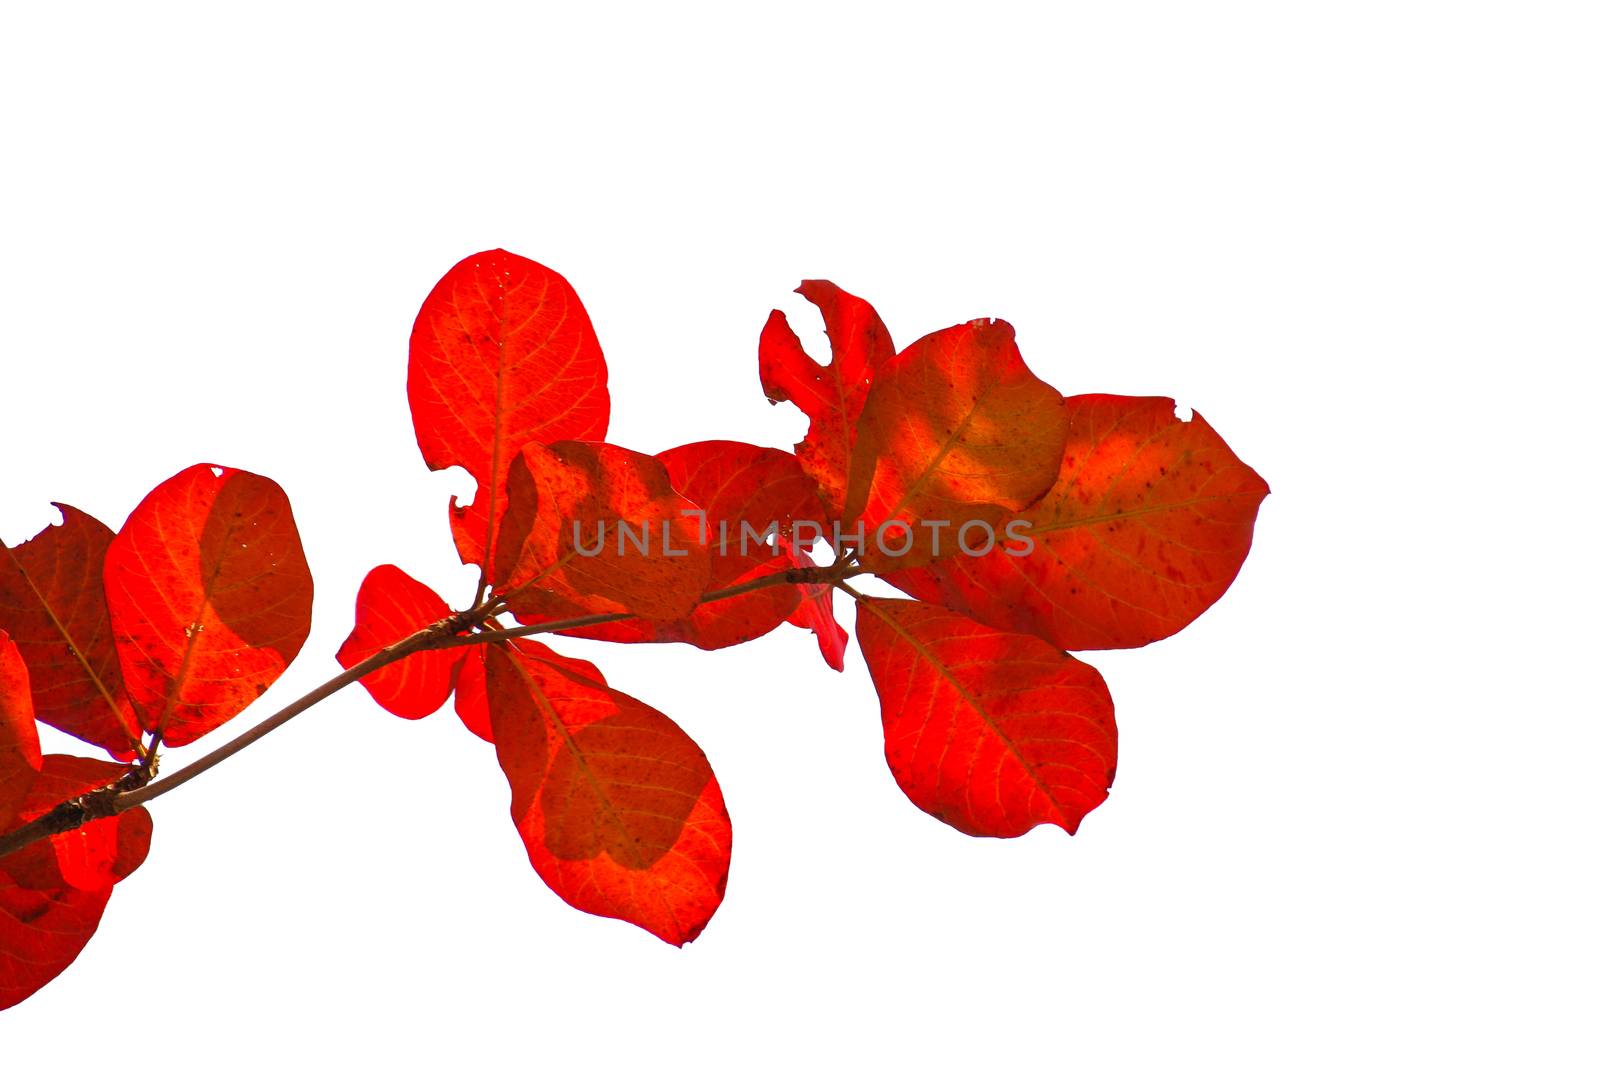 isolate red bengal almond leaves on white background